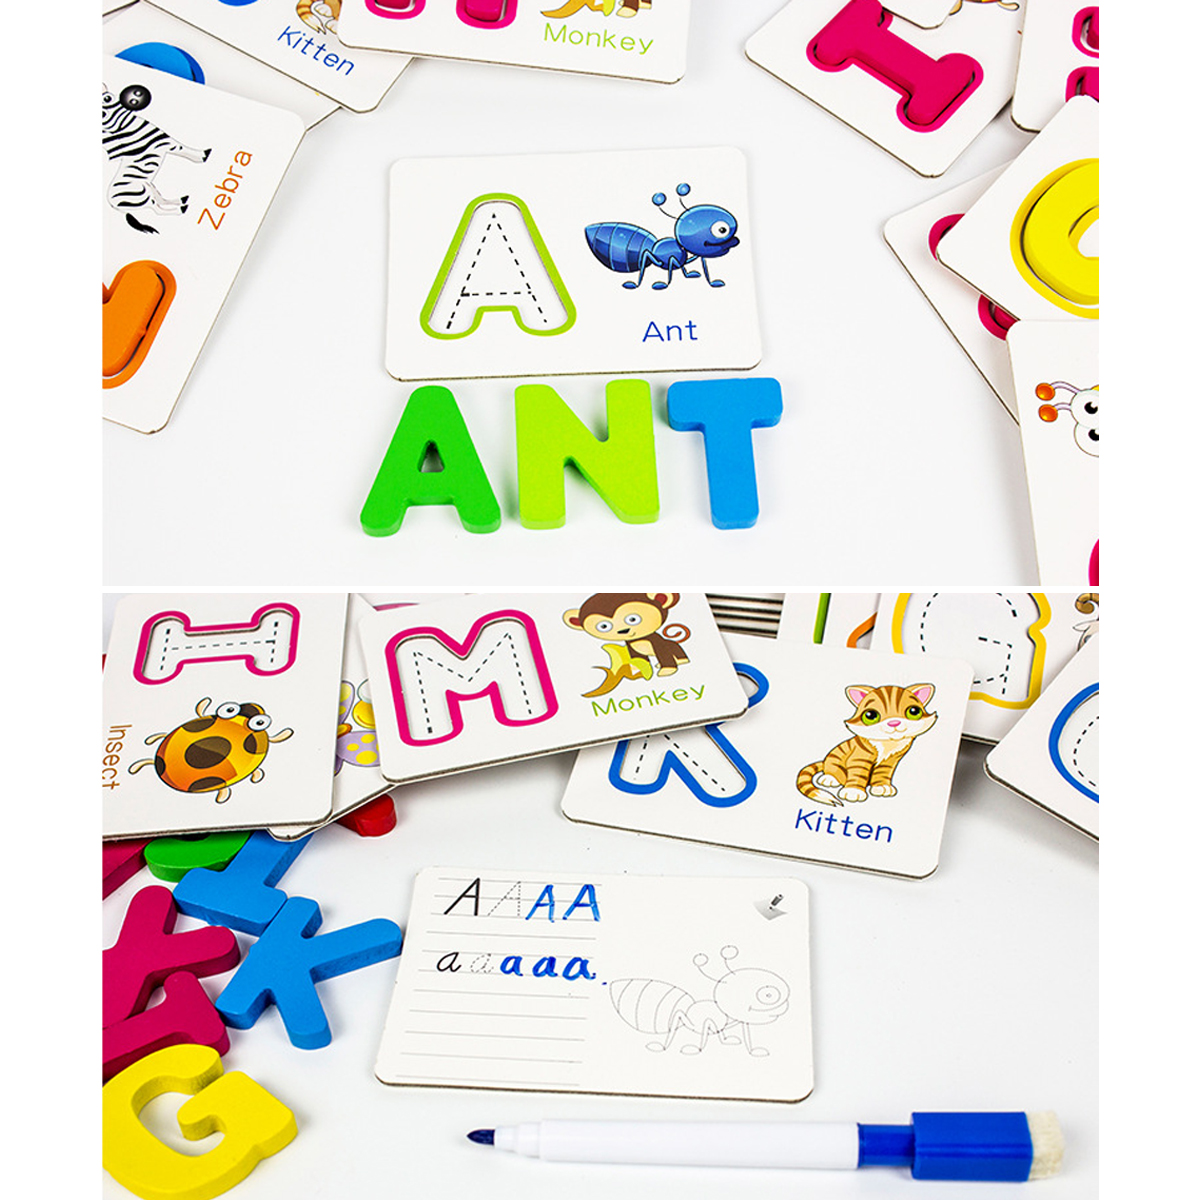 Puzzle-Alphabet-Spelling-English-Letters-Animal-Cards-Educational-Learning-Toy-for-Kids-Gift-1726968-8